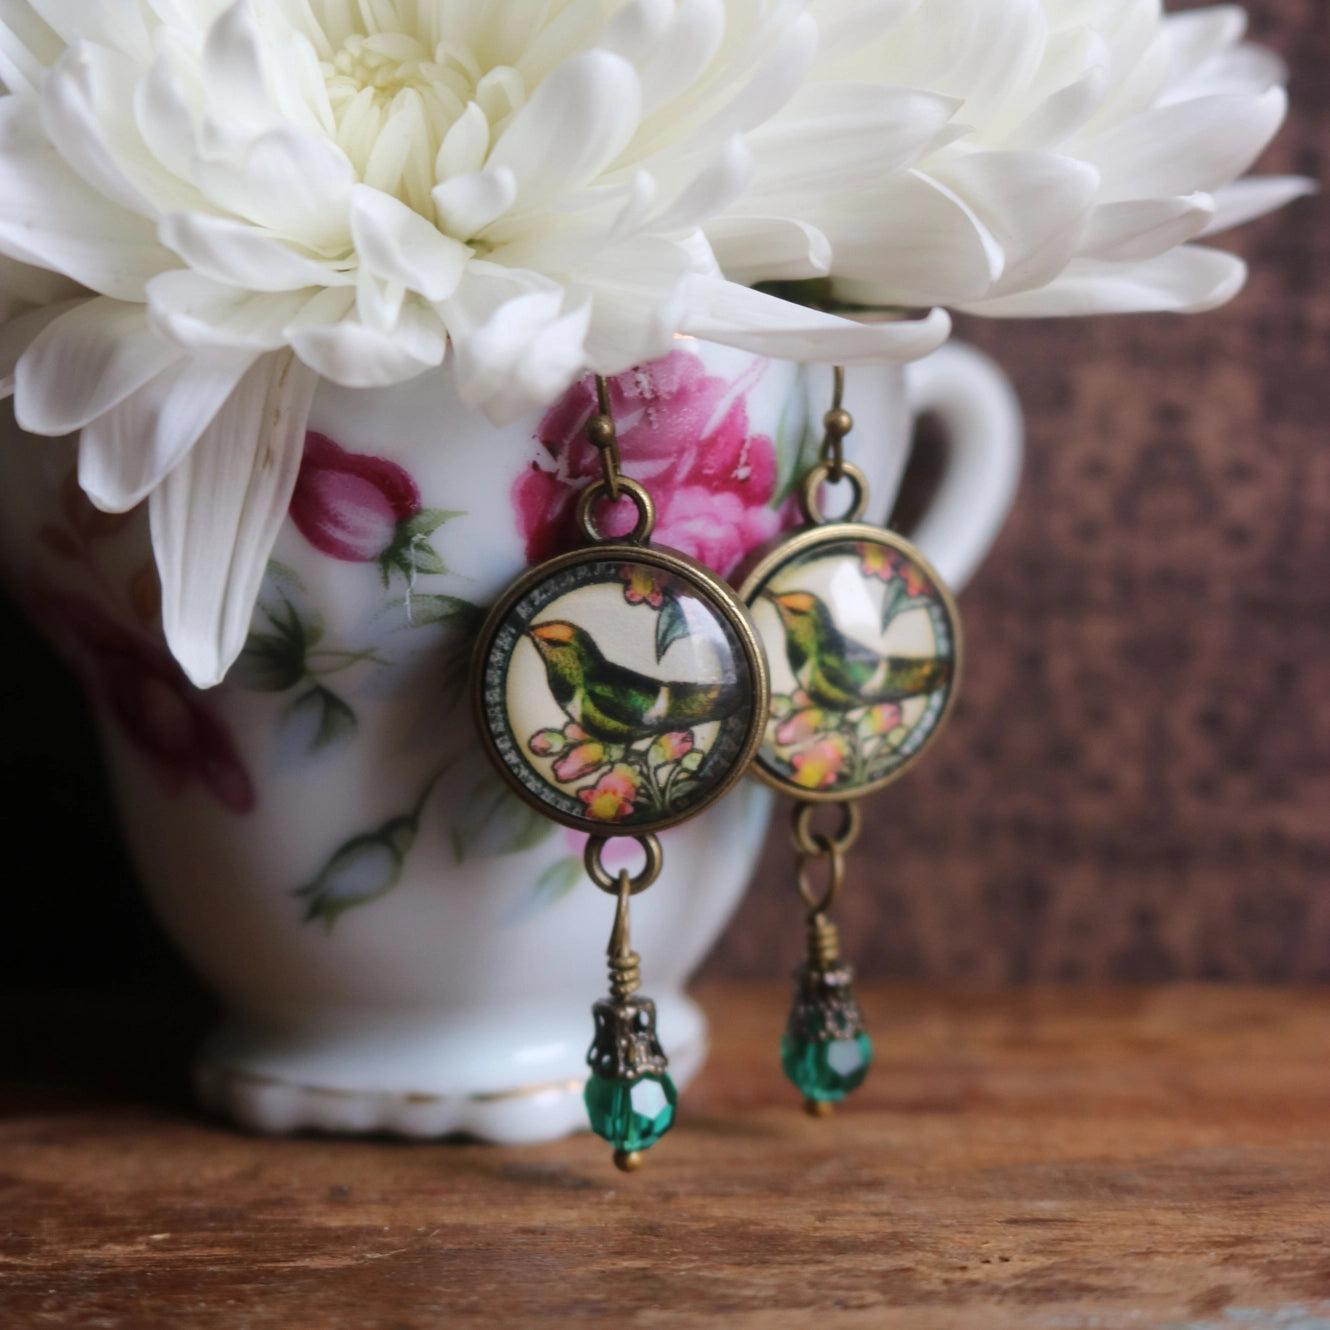 Hummingbird Inspired Vintage Glass Cabochon Earrings | Handmade in the US